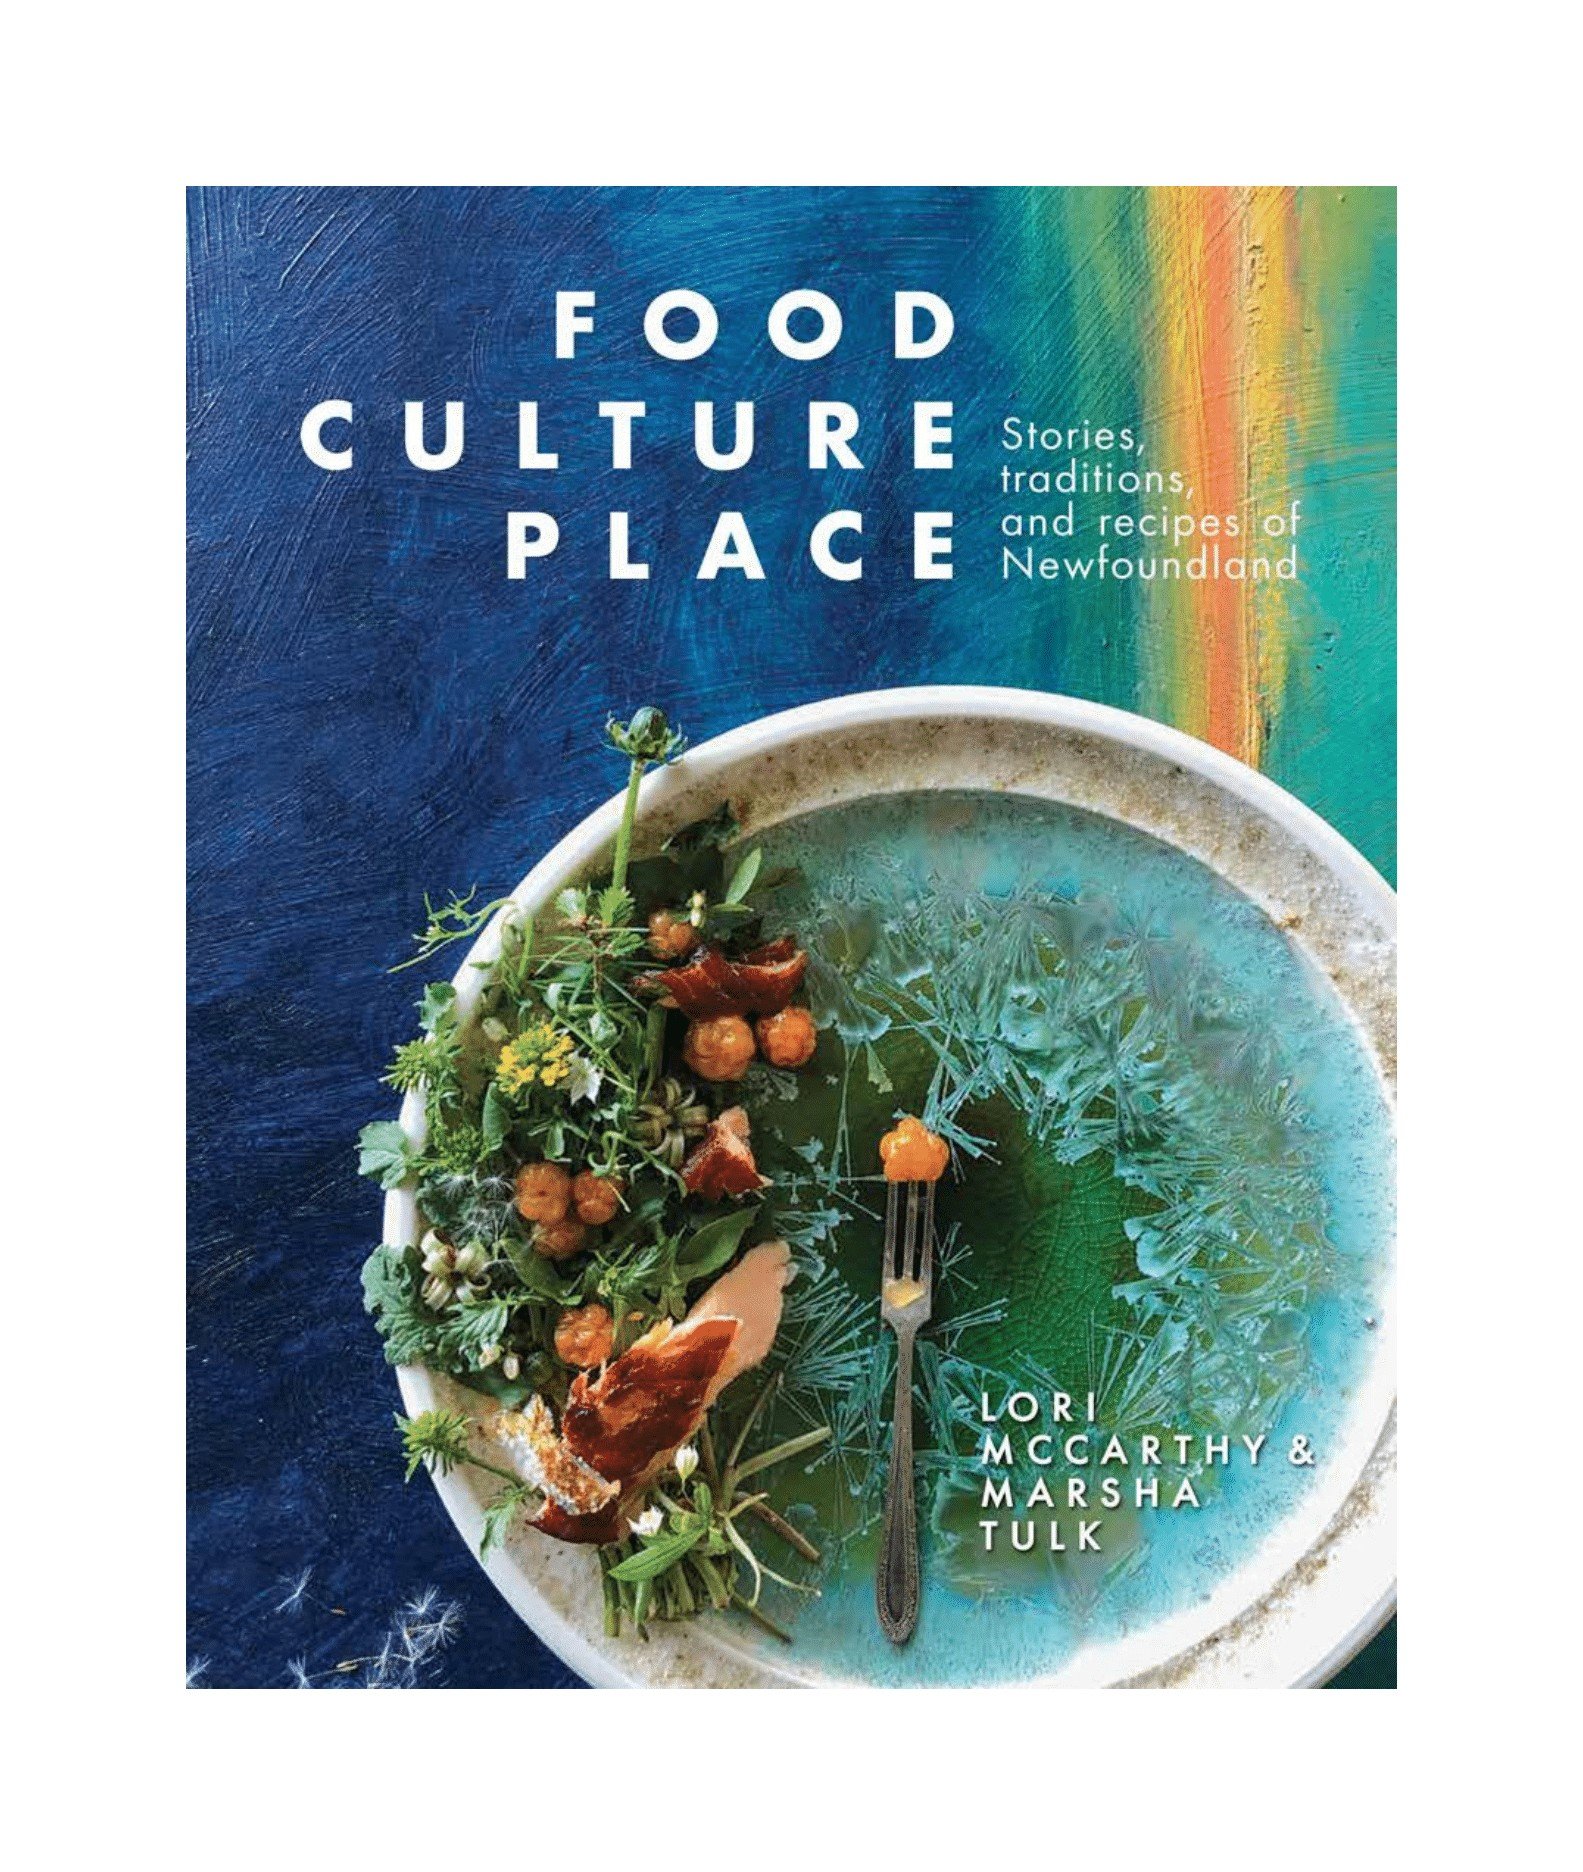 The cover of the cookbook Food, Culture, Place